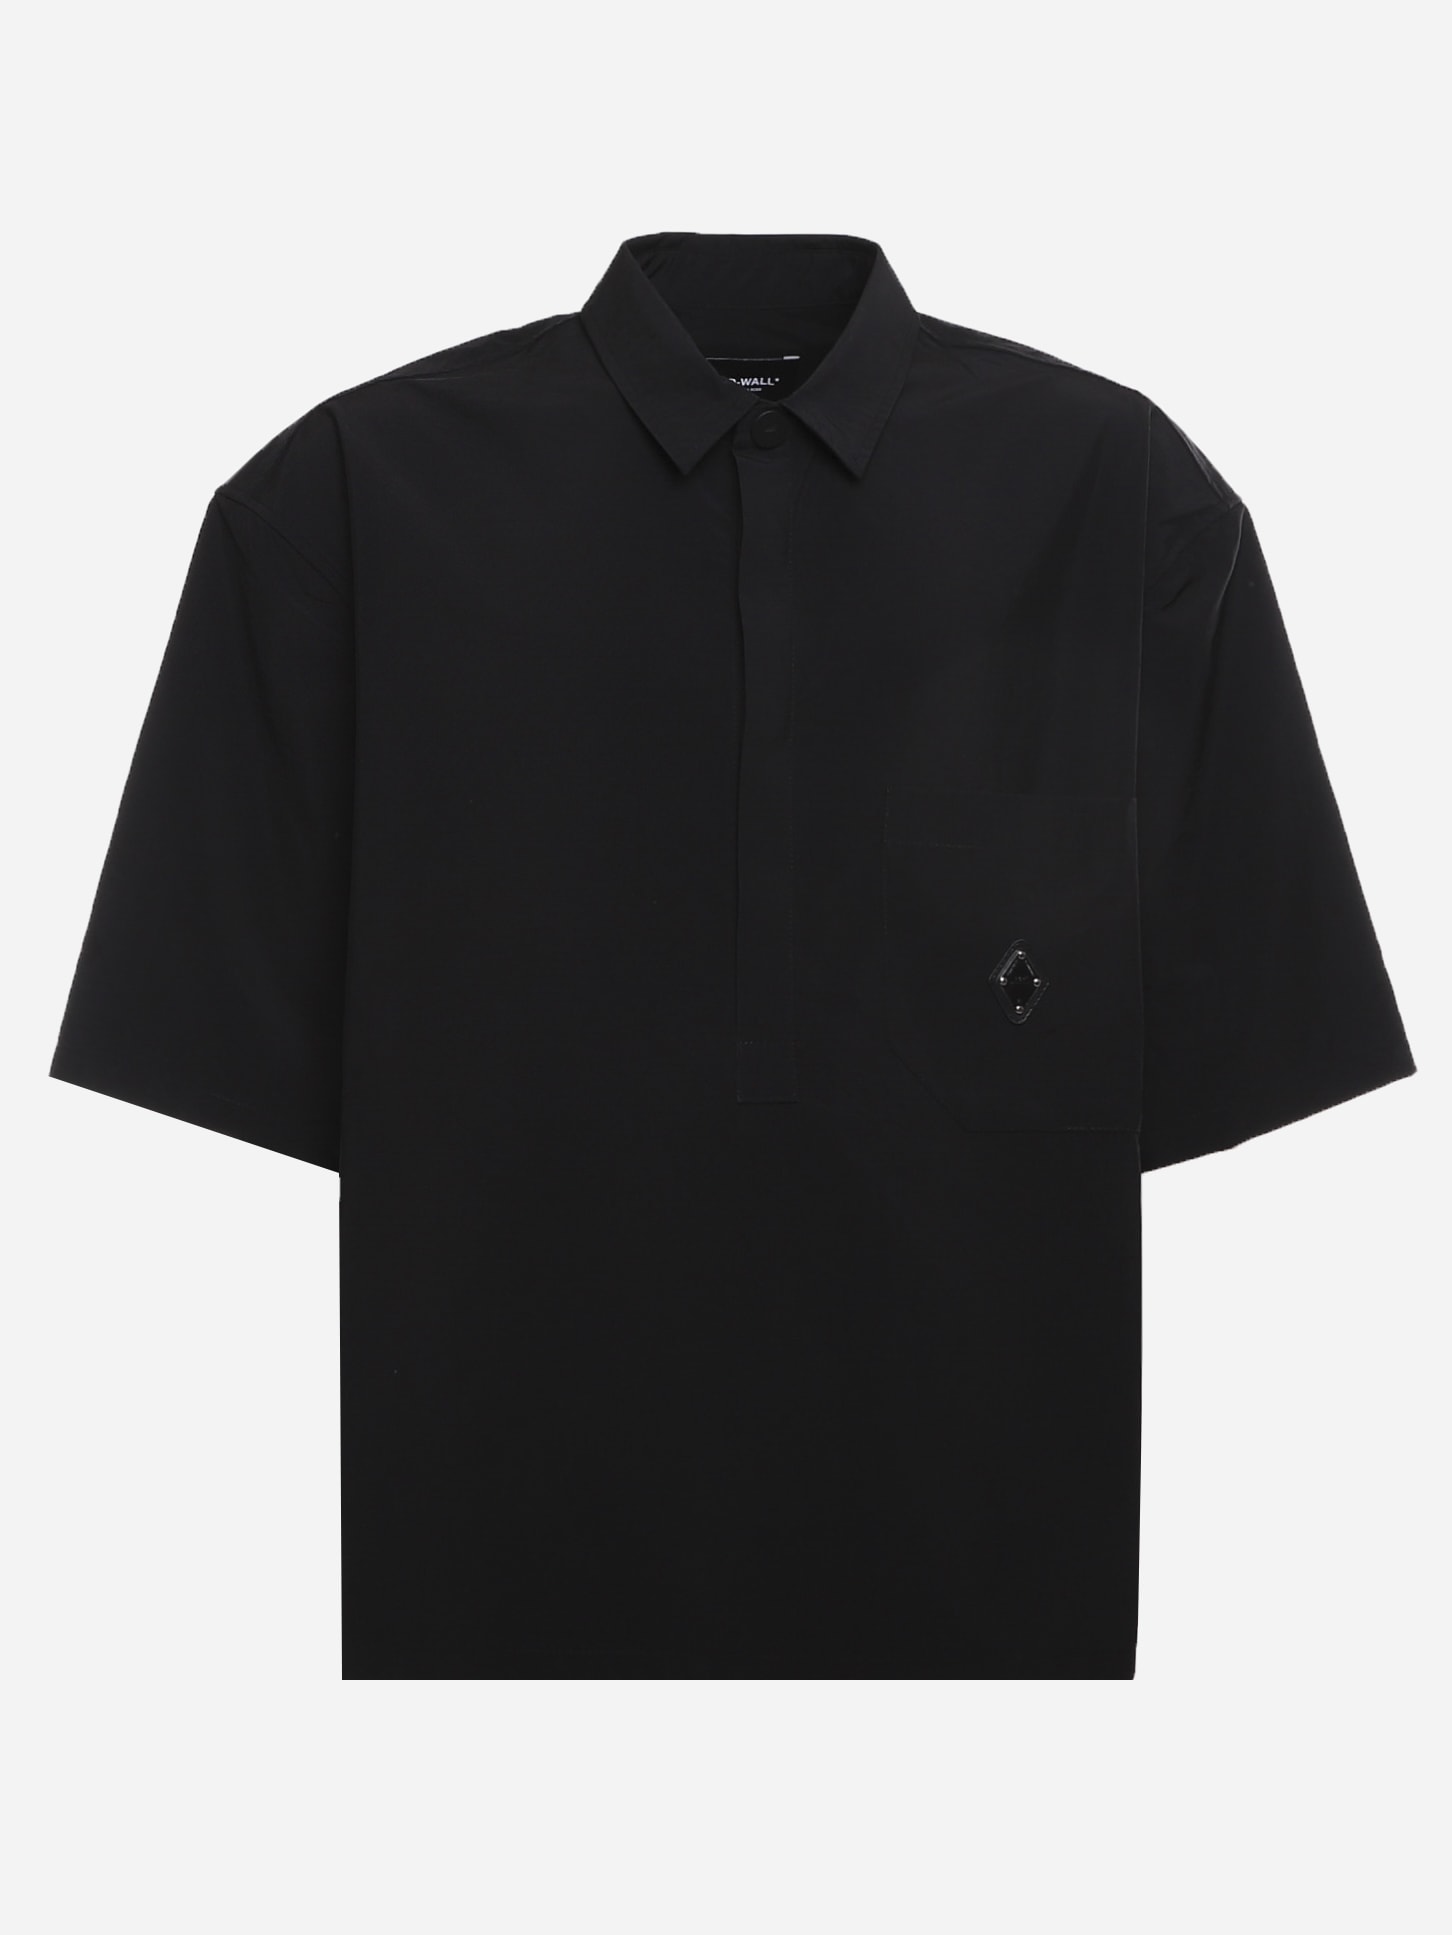 A-COLD-WALL* COTTON POLO SHIRT WITH LOGO DETAIL,11894812